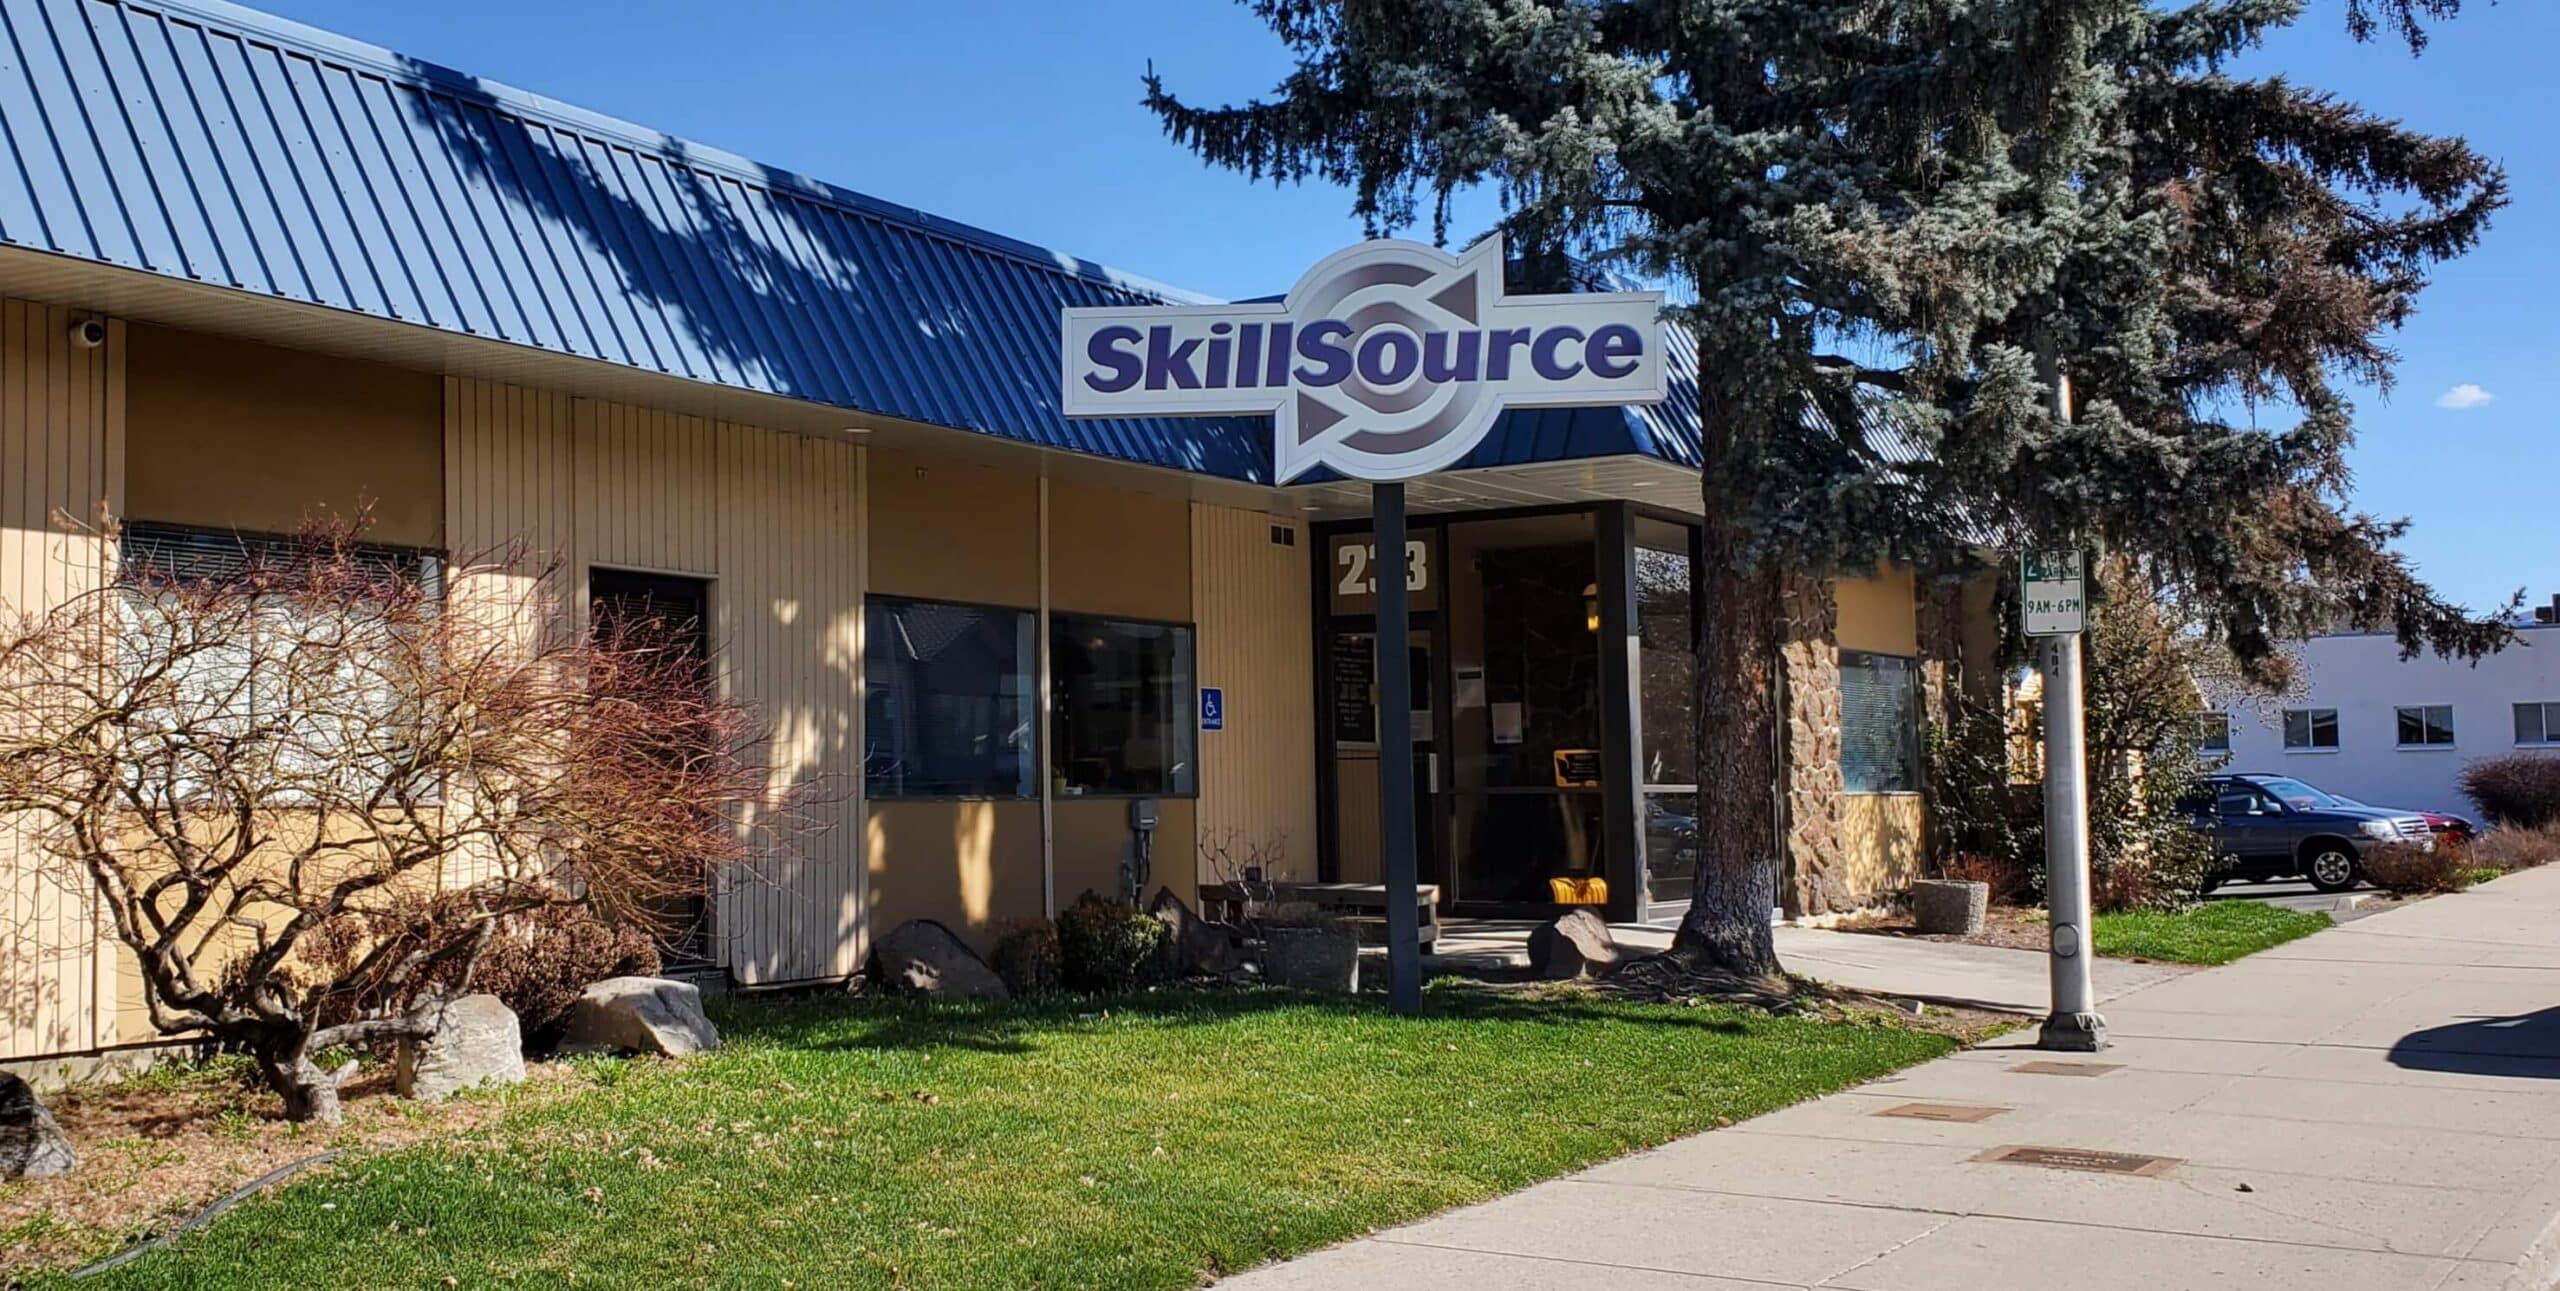 SkillSource Awarded $1.3 Million in Community Reinvestment Funds by the Department of Commerce